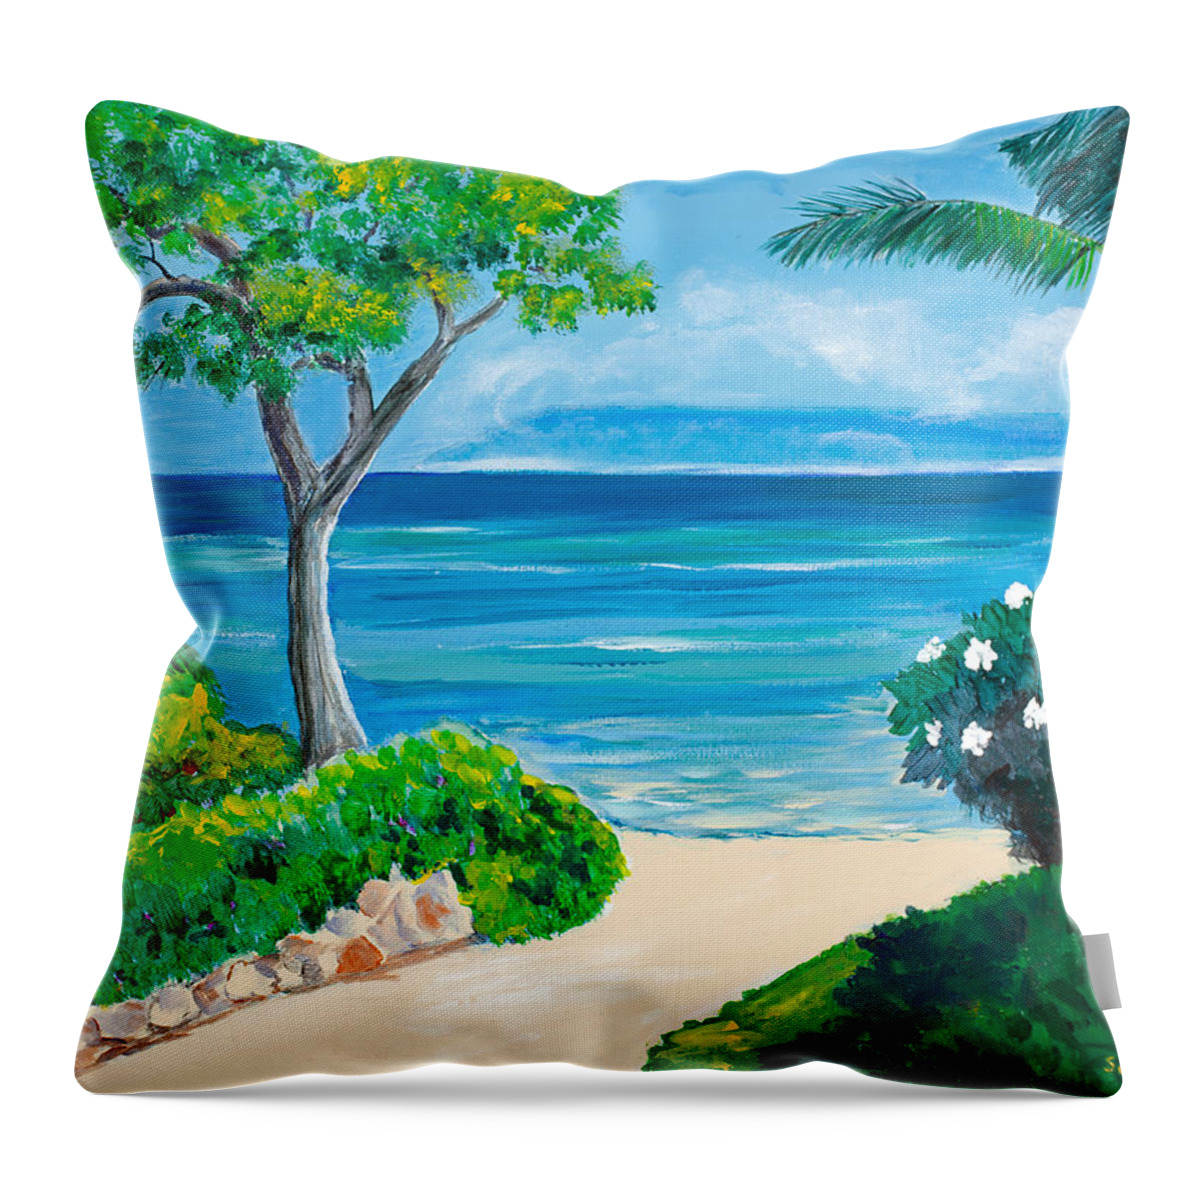 Landscape Throw Pillow featuring the painting Naplili Path 16 x 20 by Santana Star